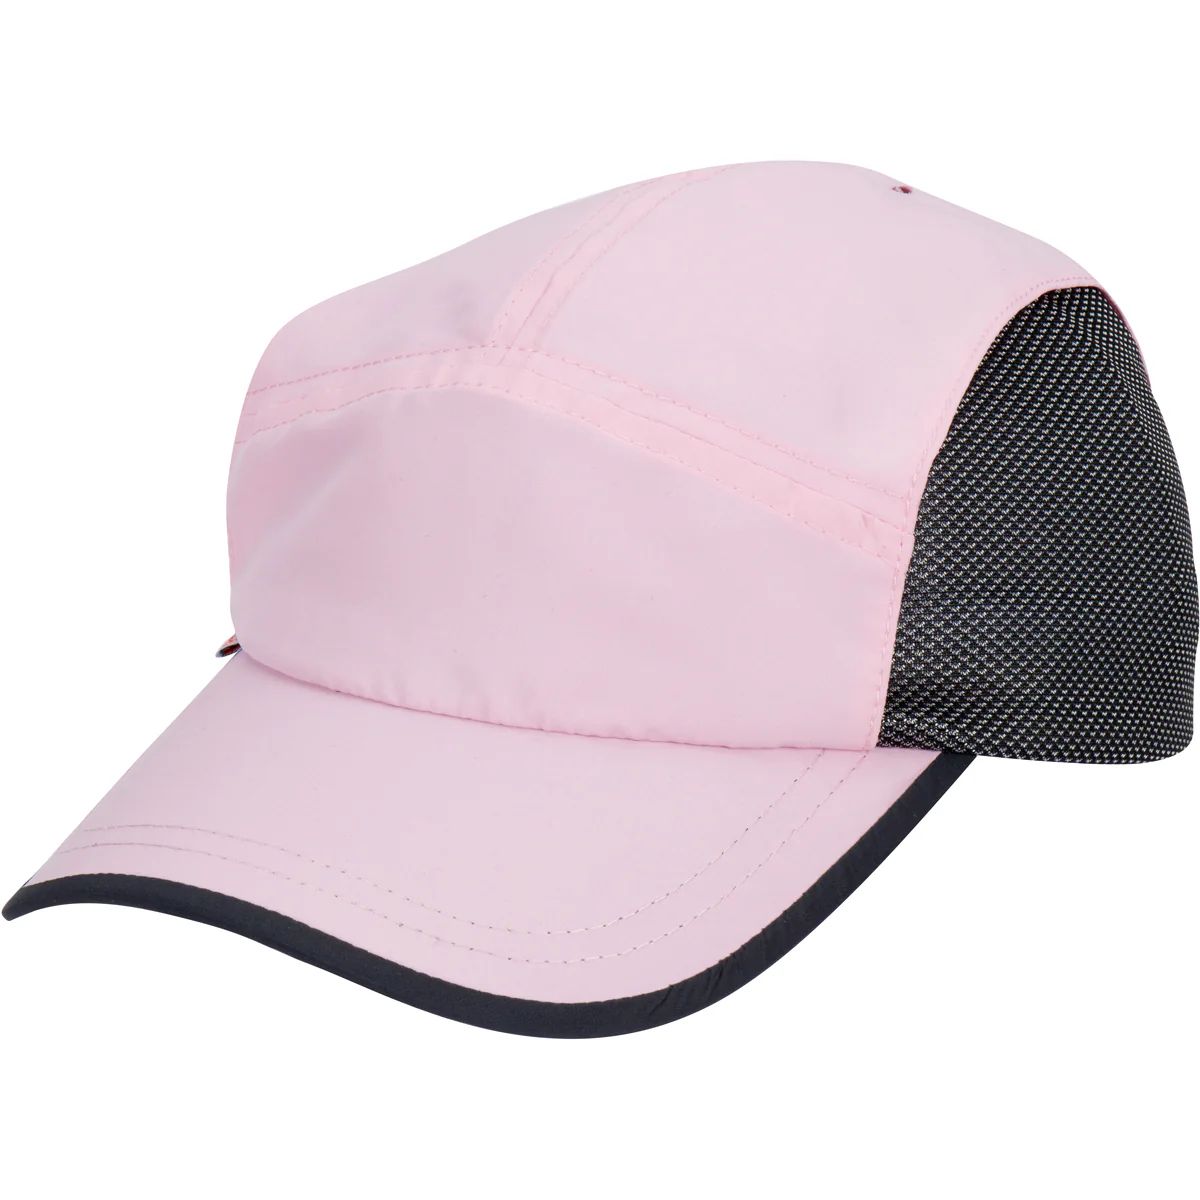 Adjustable UPF Baseball Hat - one-size fits all | Pink | SwimZip